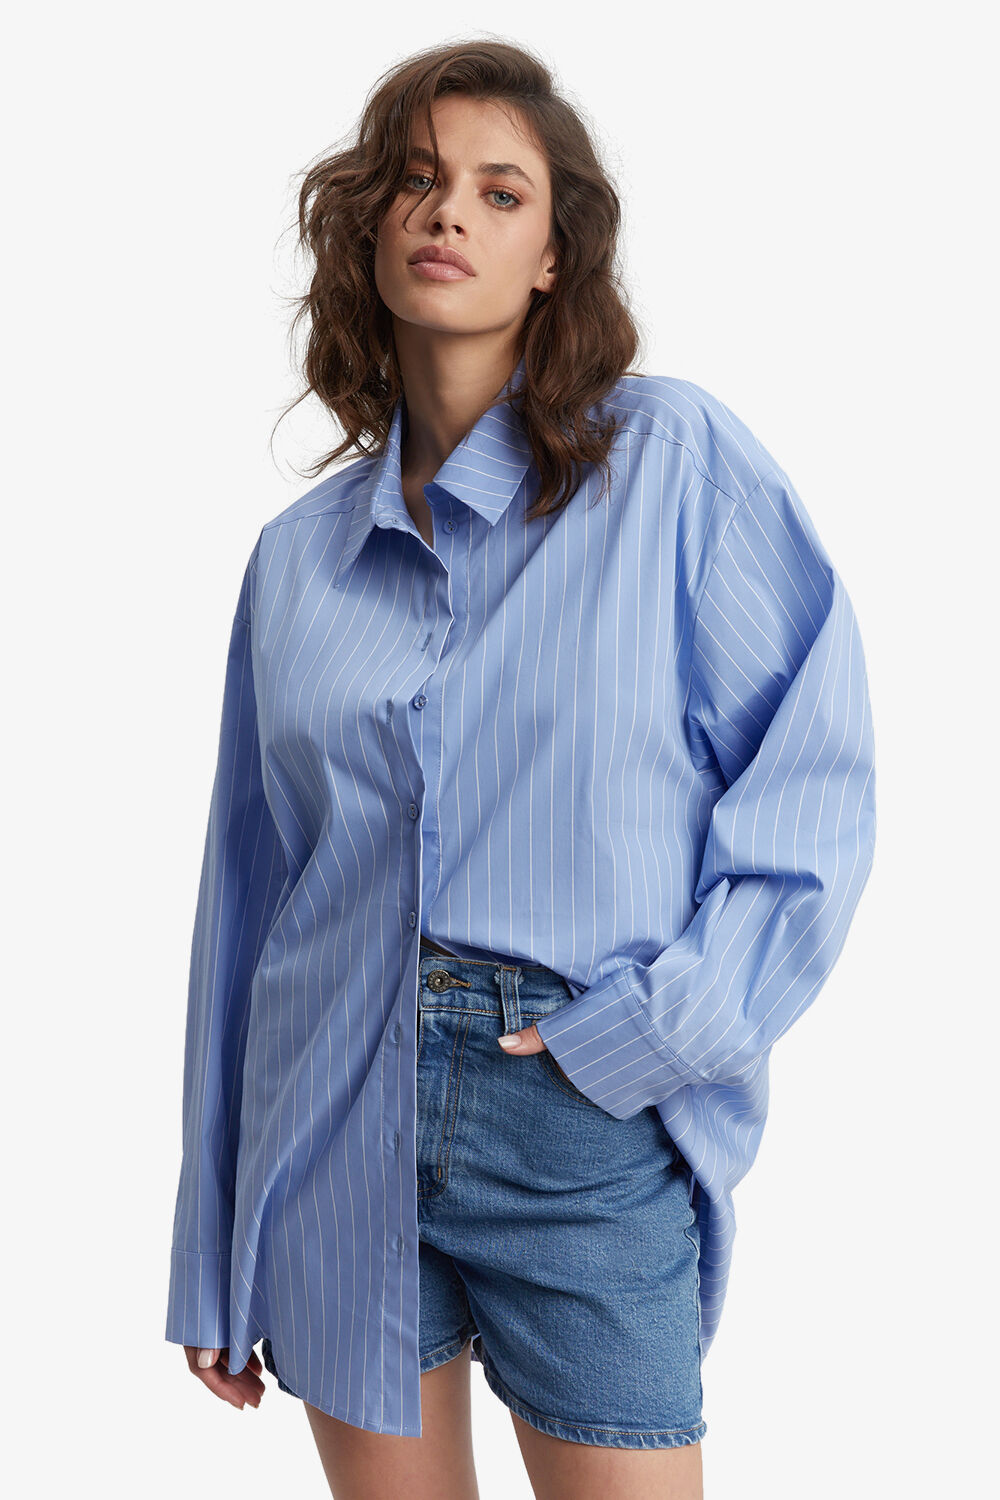 STRIPED OVERSIZED SHIRT in colour CLOUD DANCER